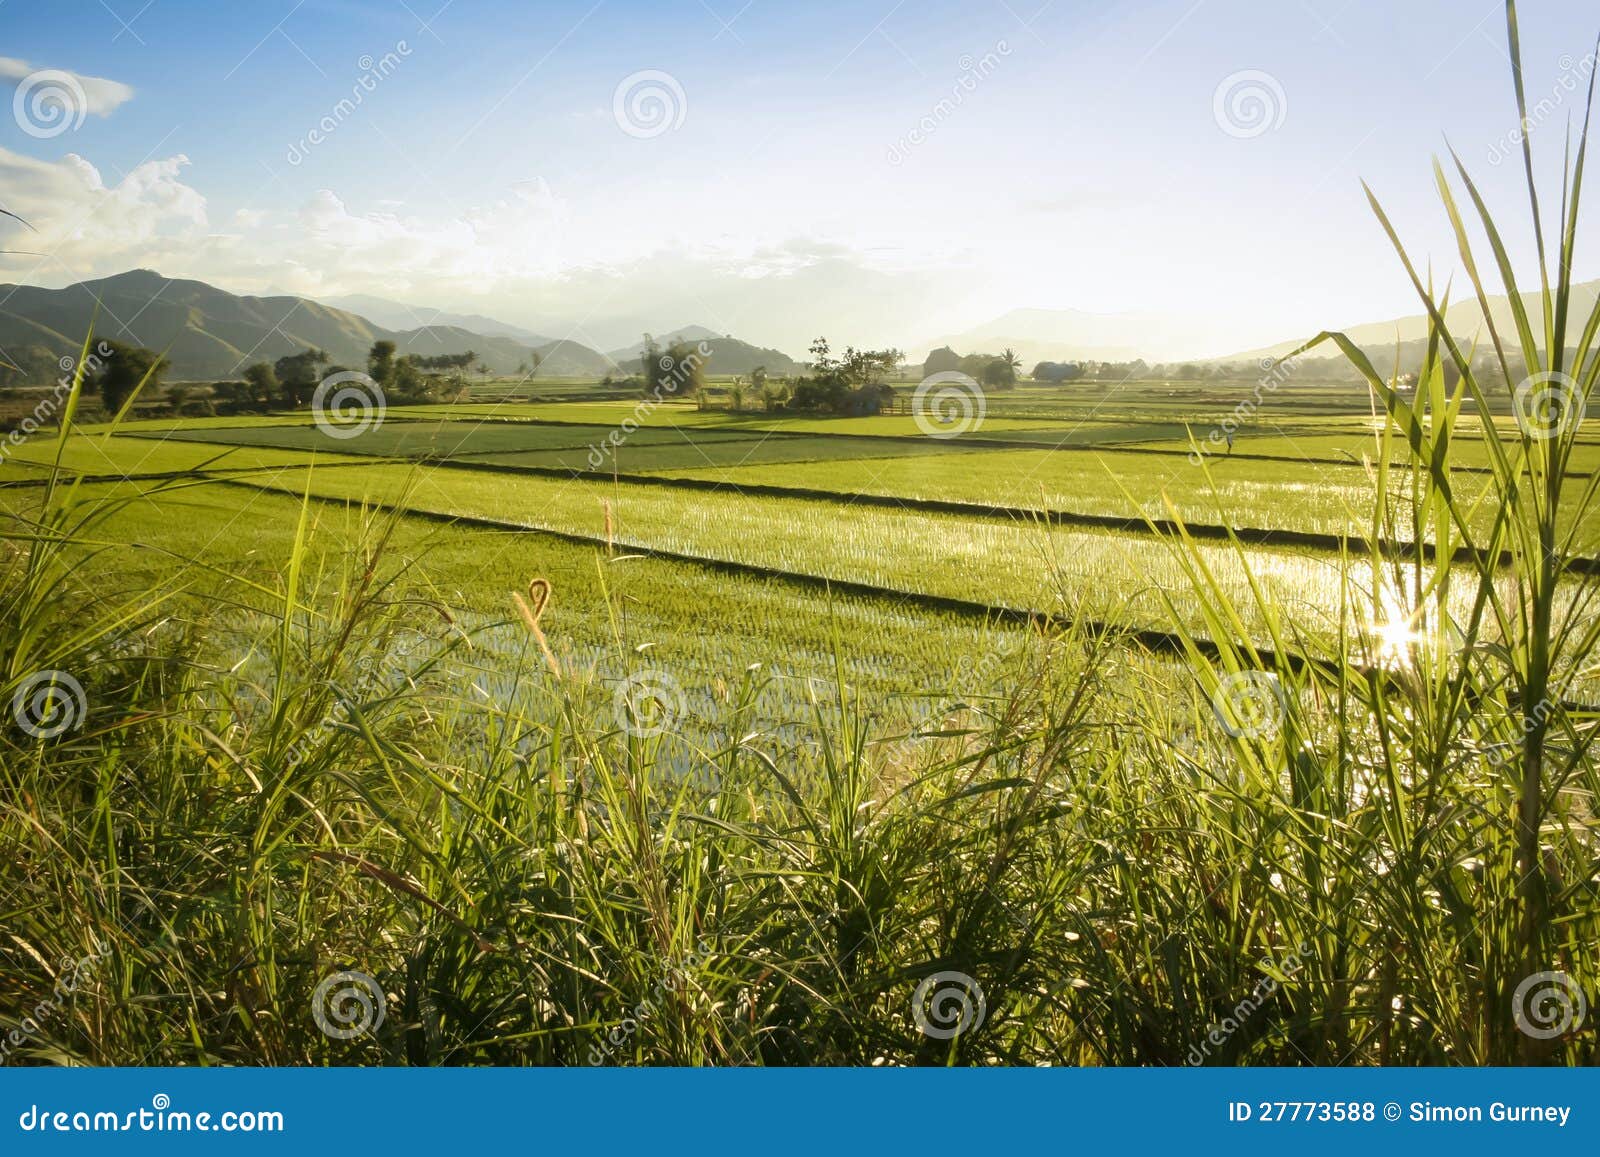 rice fields northern luzon the philippines